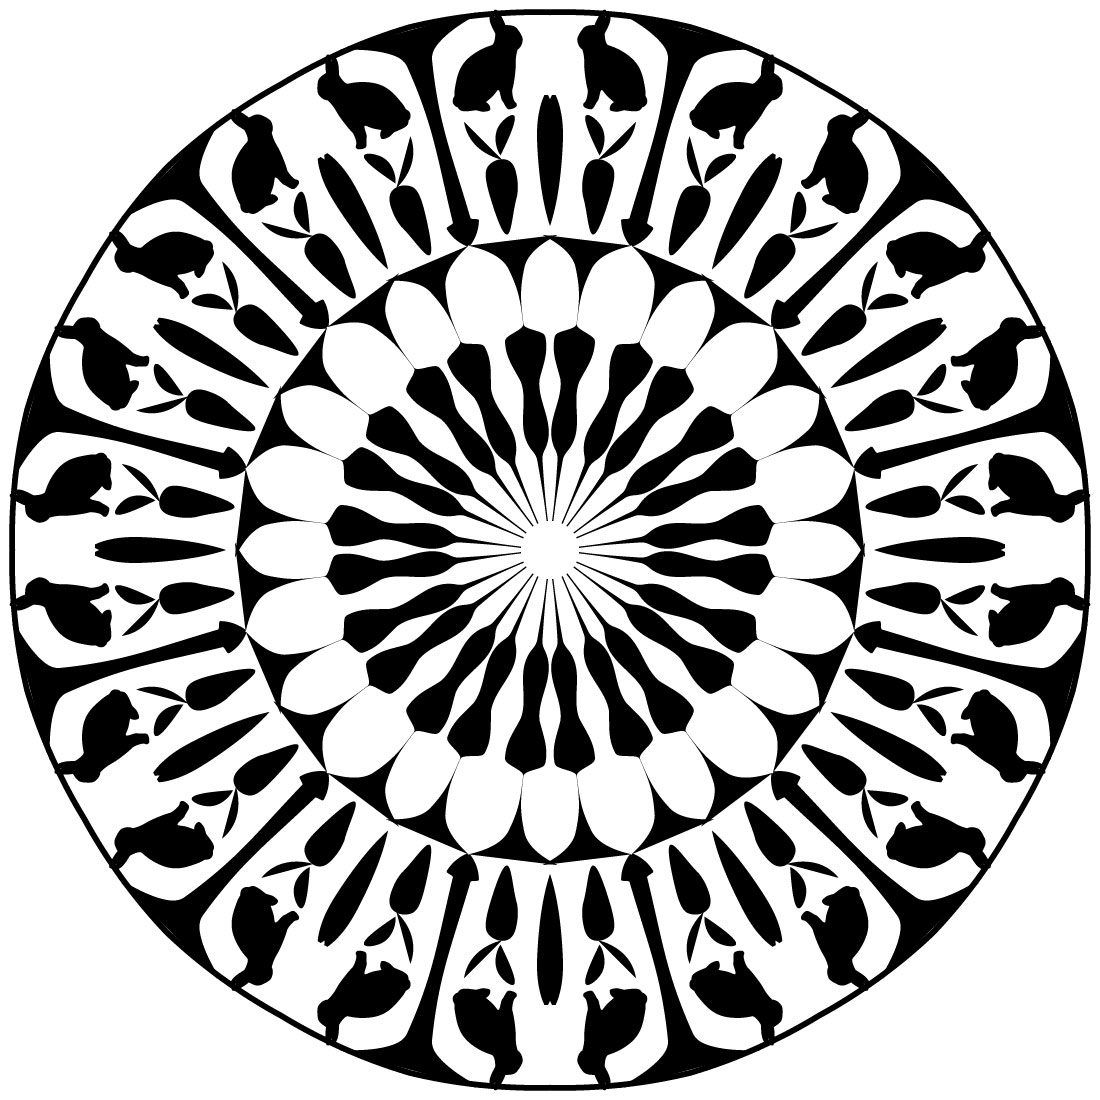 Mandala-art-with-Rabbit-with-Carrot cover image.